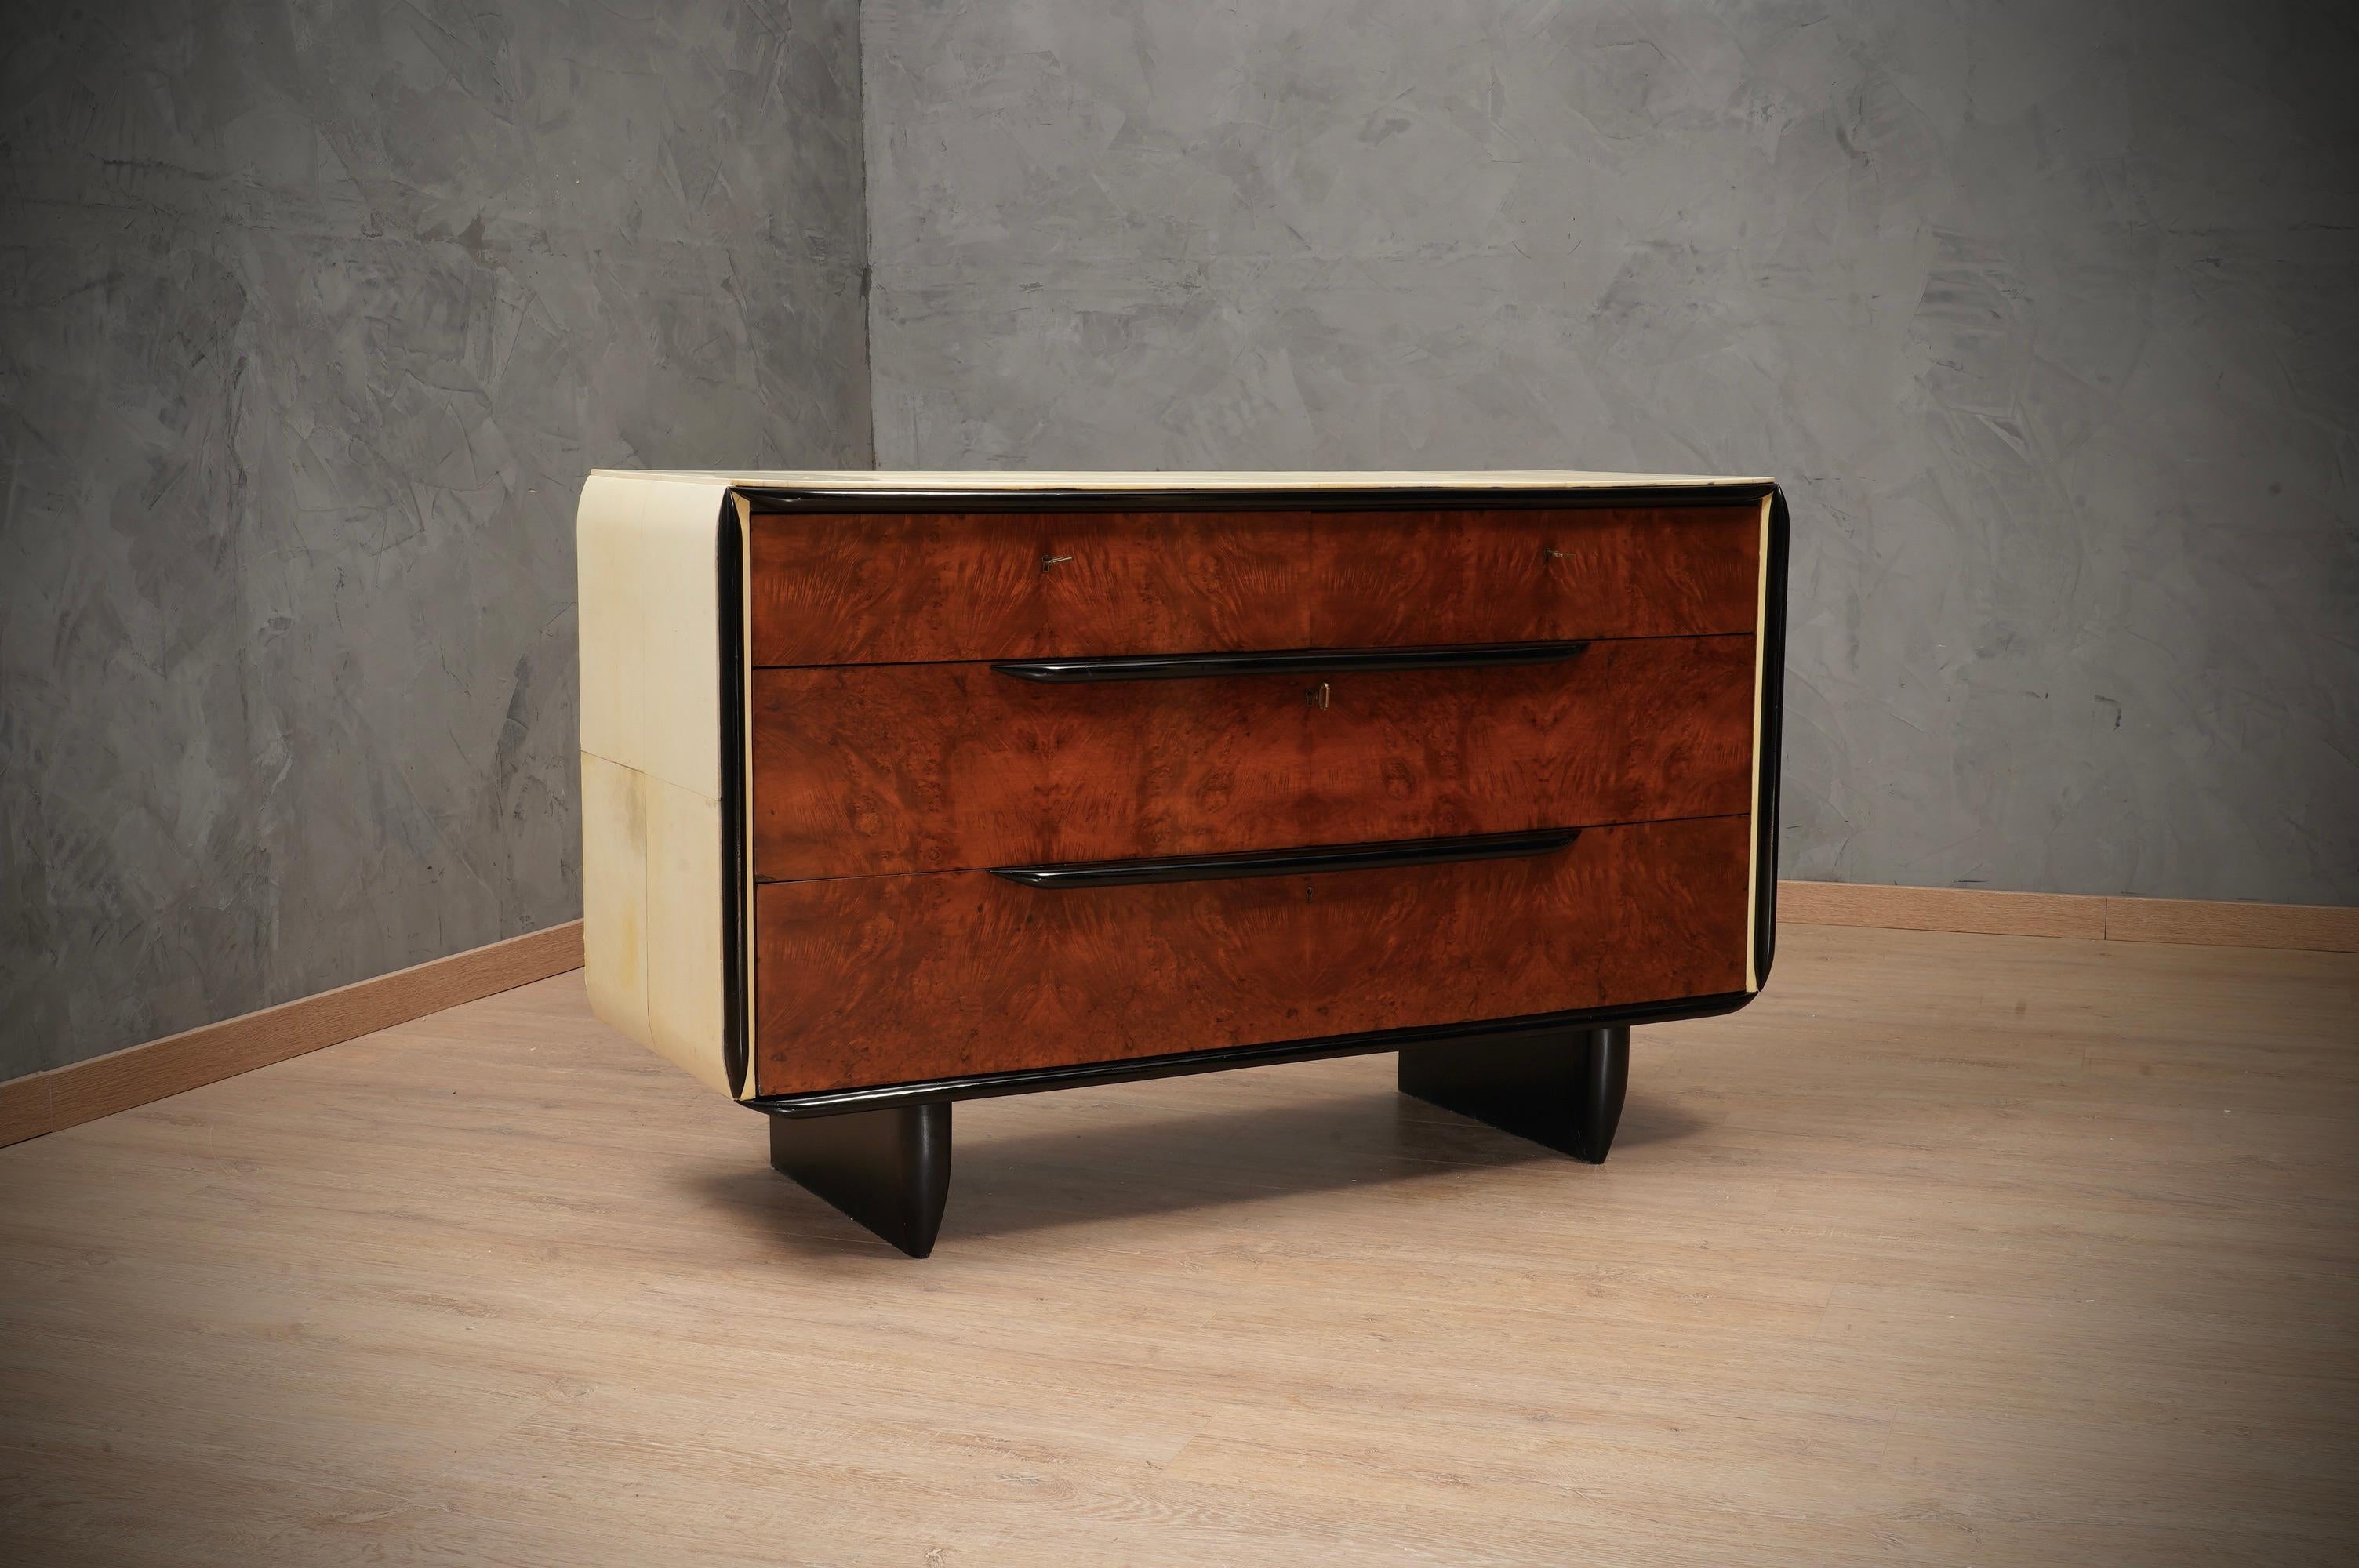 Italian Art Deco dresser of the first half of the last century. One can recognize his Italian style, Paolo Buffa, Vittorio Dassi, Osvaldo Borsani. Precious materials that have been used to compose it, from goatskin to walnut wood to brass. Its shape